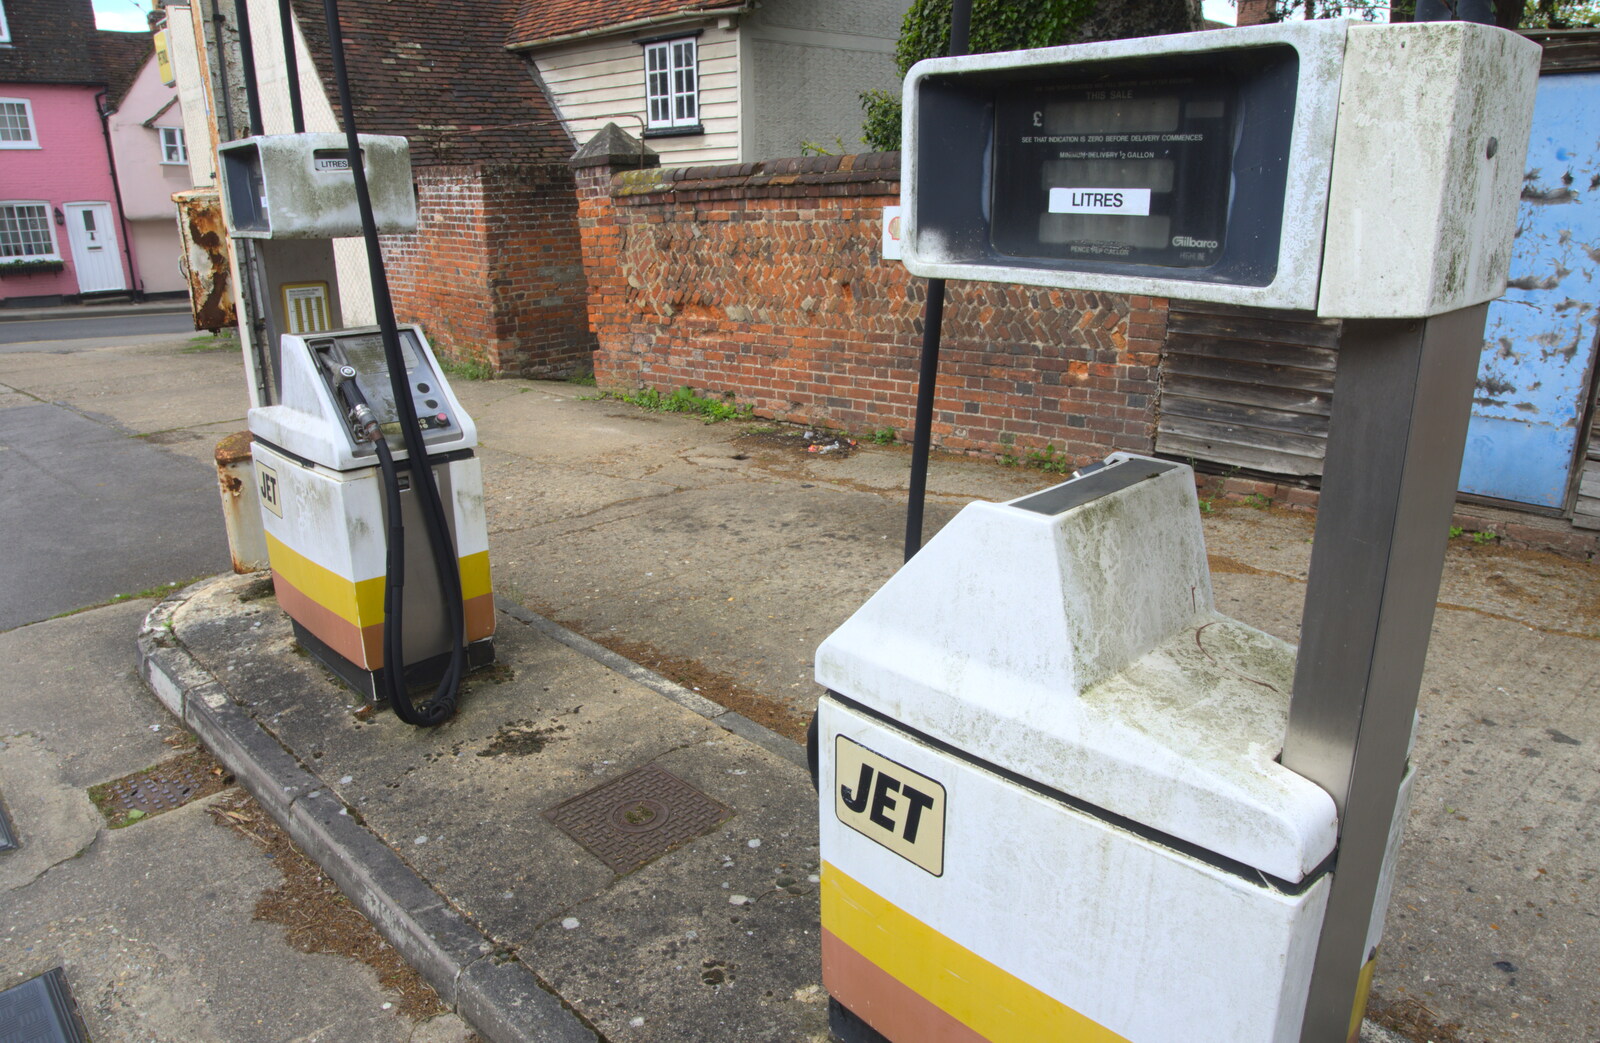 Derelict petrol pumps from The BSCC Cycling Weekend, The Swan Inn, Thaxted, Essex - 12th May 2012